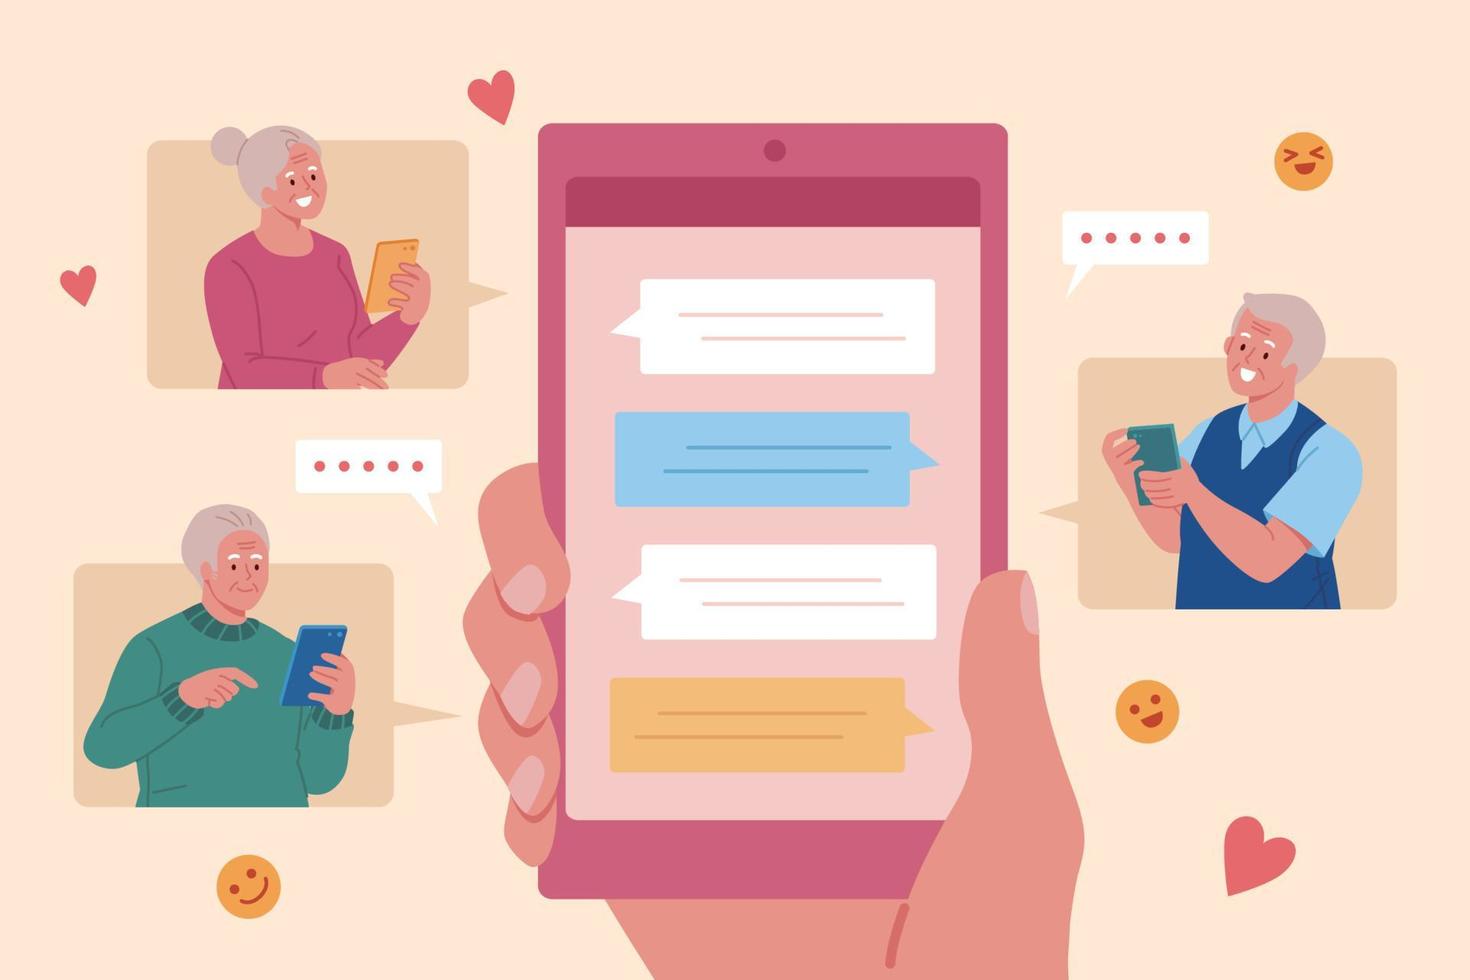 Elders texting with mobile in group . Flat illustration of a woman sending text messages and emoticons from her first-person perspective vector